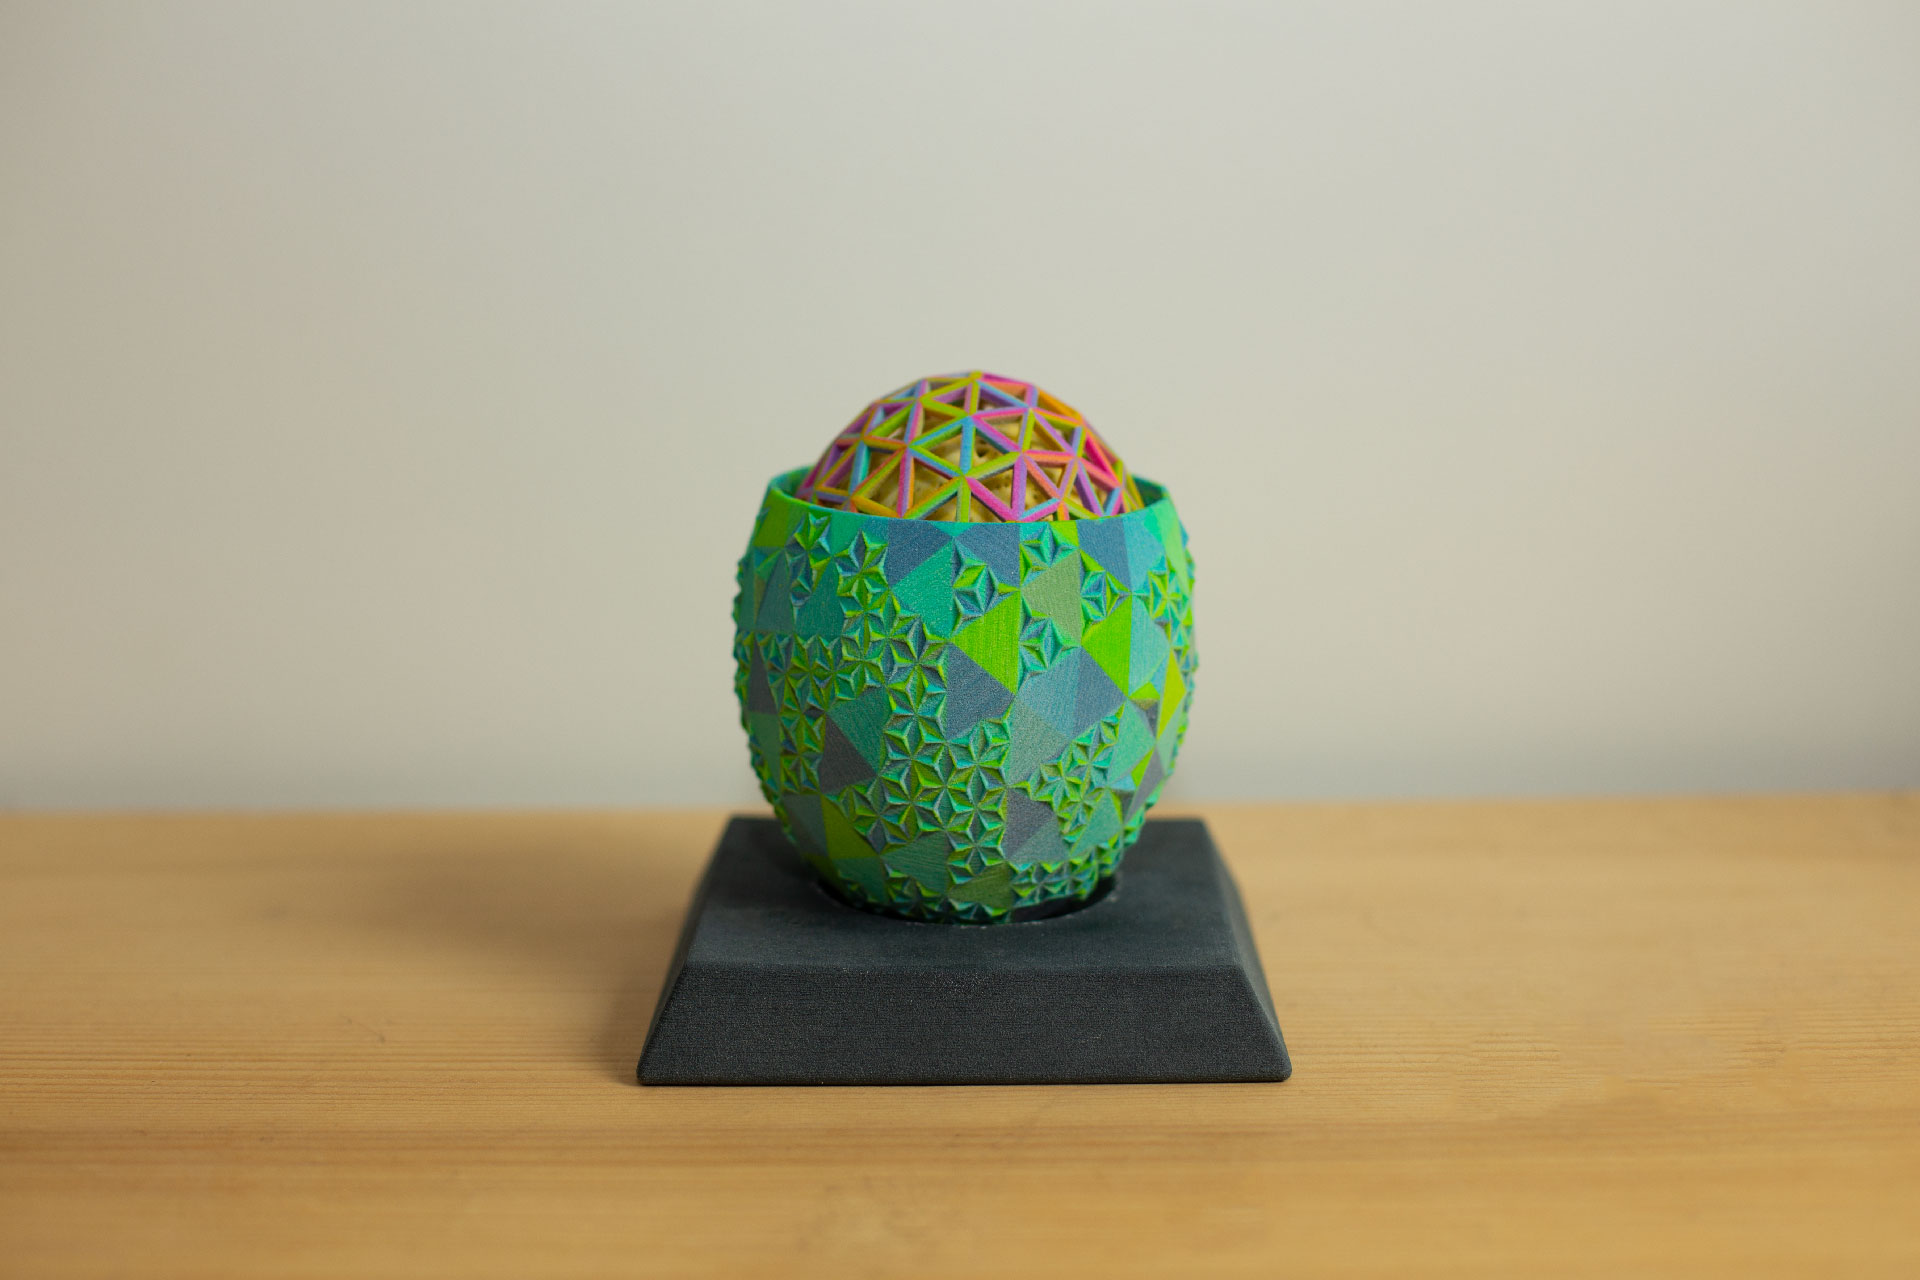 A photo of the 3D printed sculpture